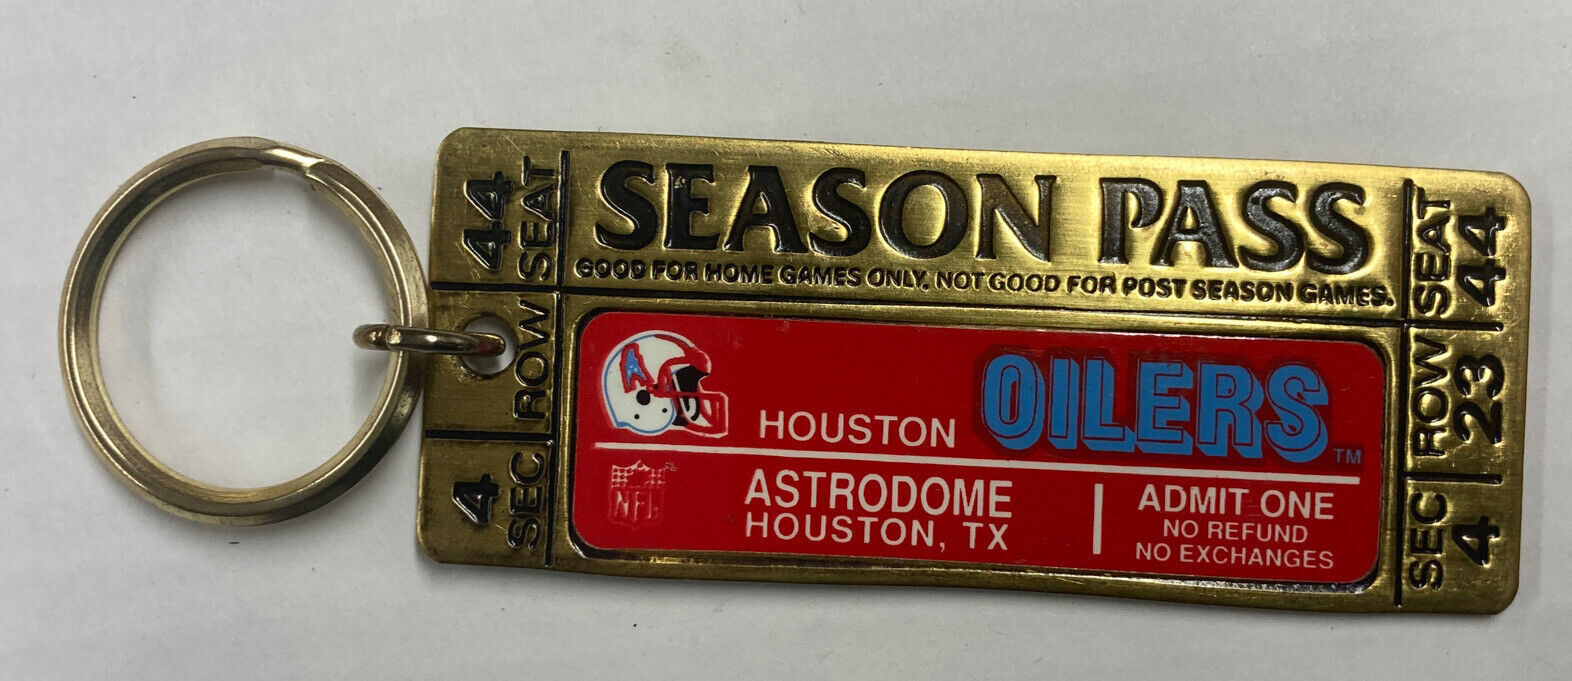 HOUSTON OILERS AT ASTRODOME KEY RING KEYCHAINS NFL FOOTBALL TEAM